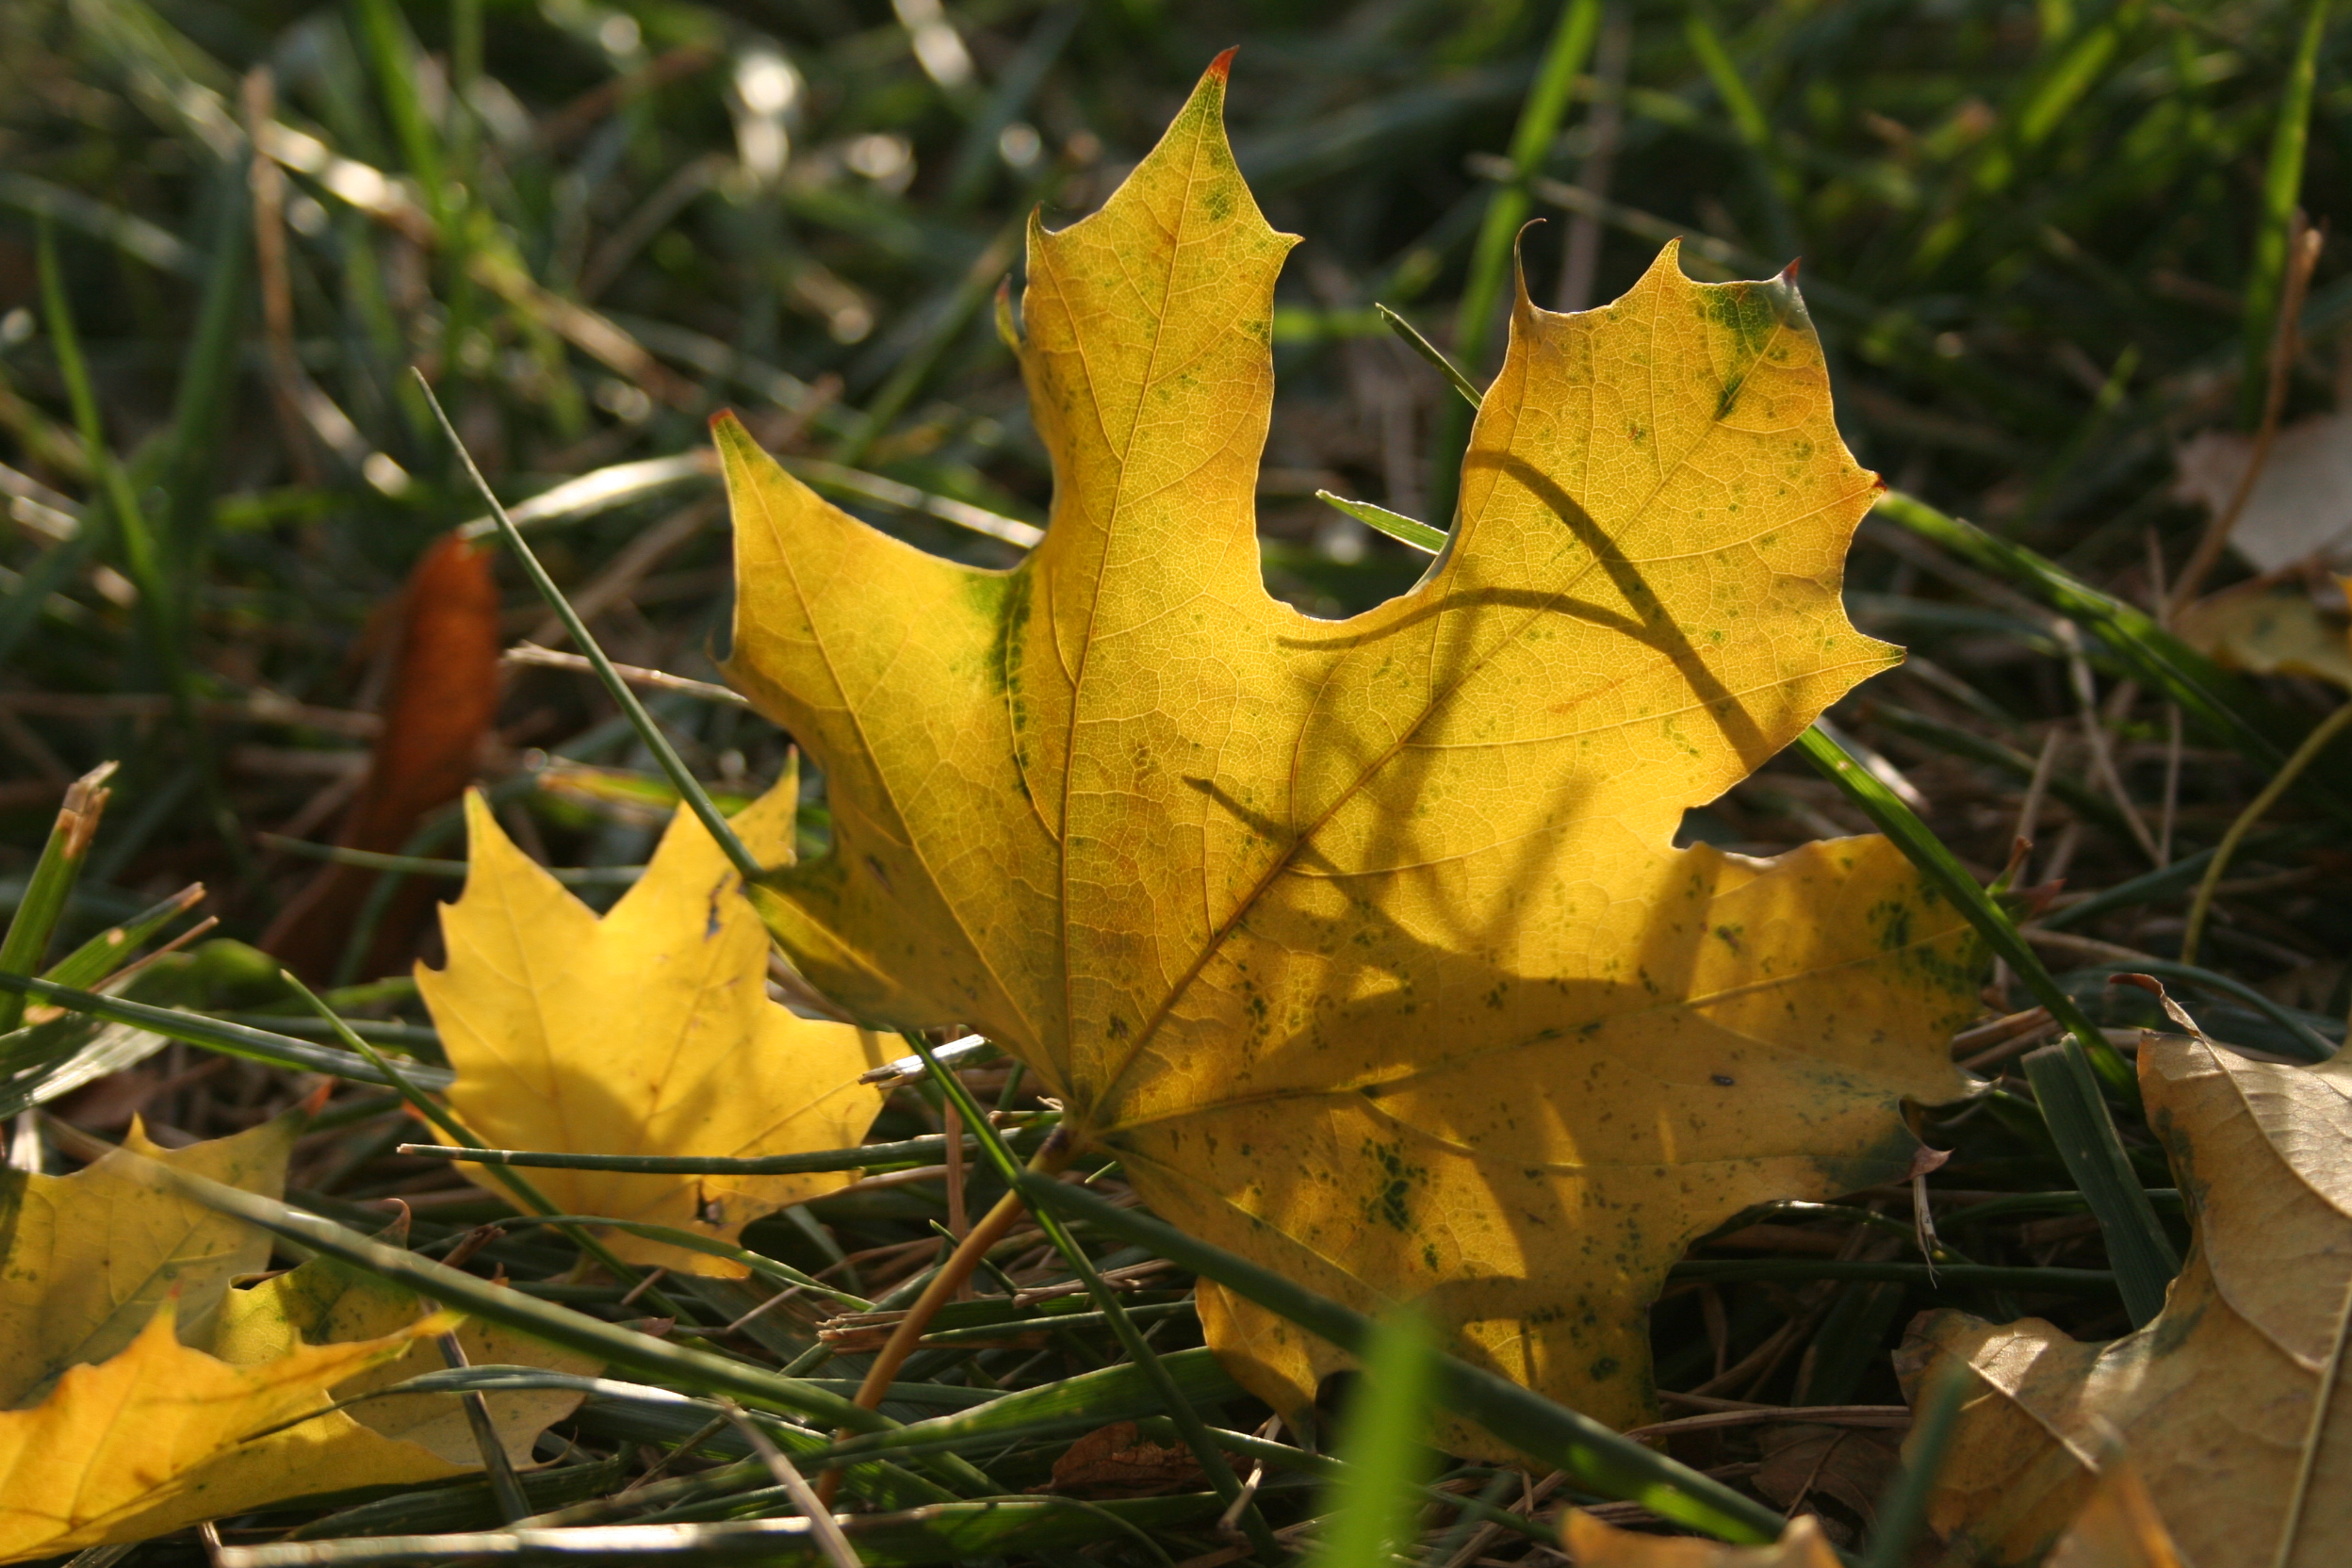 Norway Maple leaf in grass